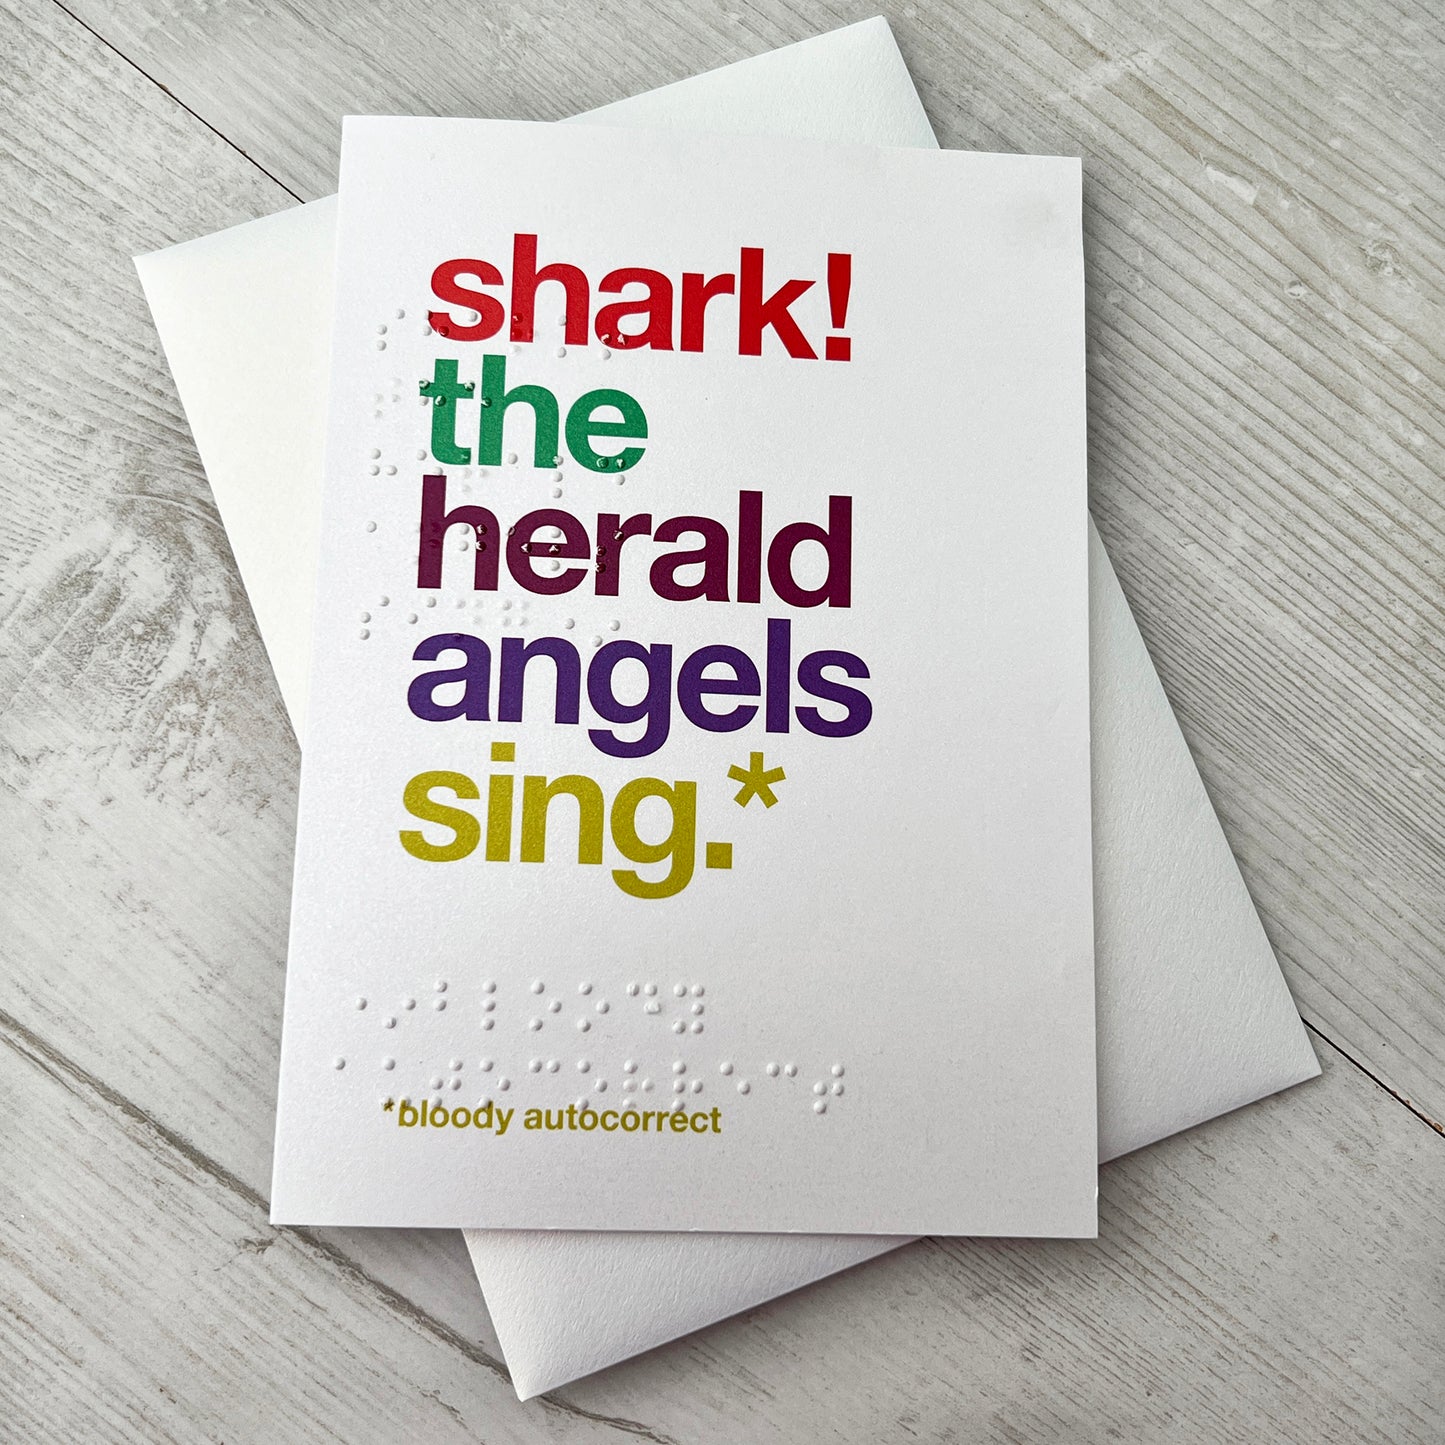 A white card with colourful text saying shark! the herald angels sing.* *bloody autocorrect with braille saying the same.